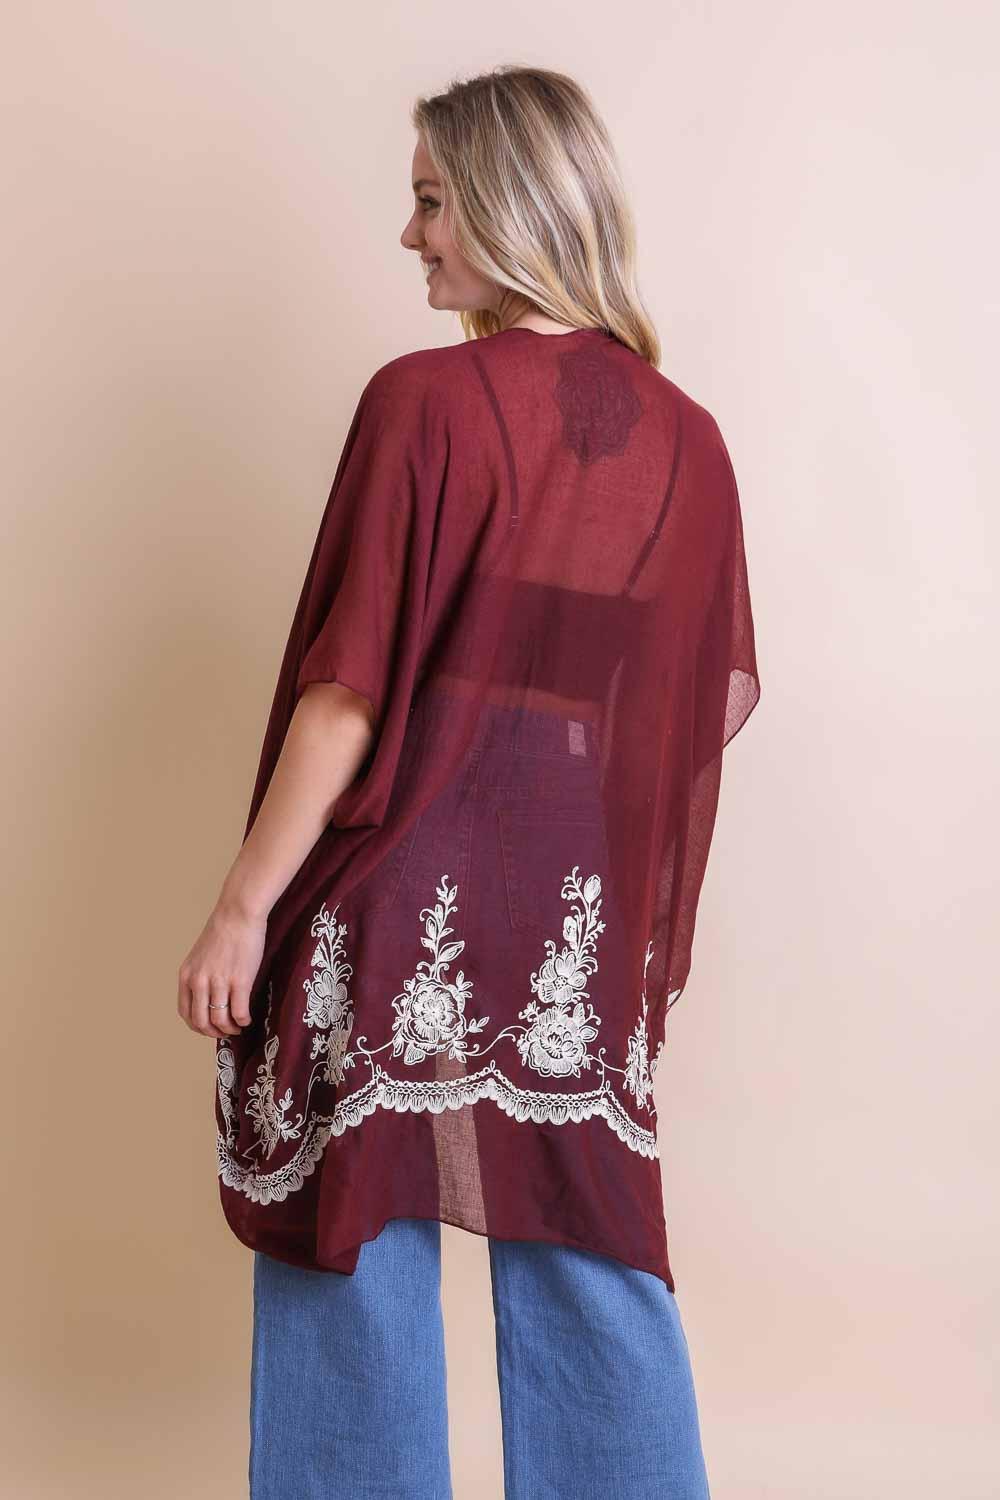 Floral Embroidered Stitched Kimono - Brand My Case